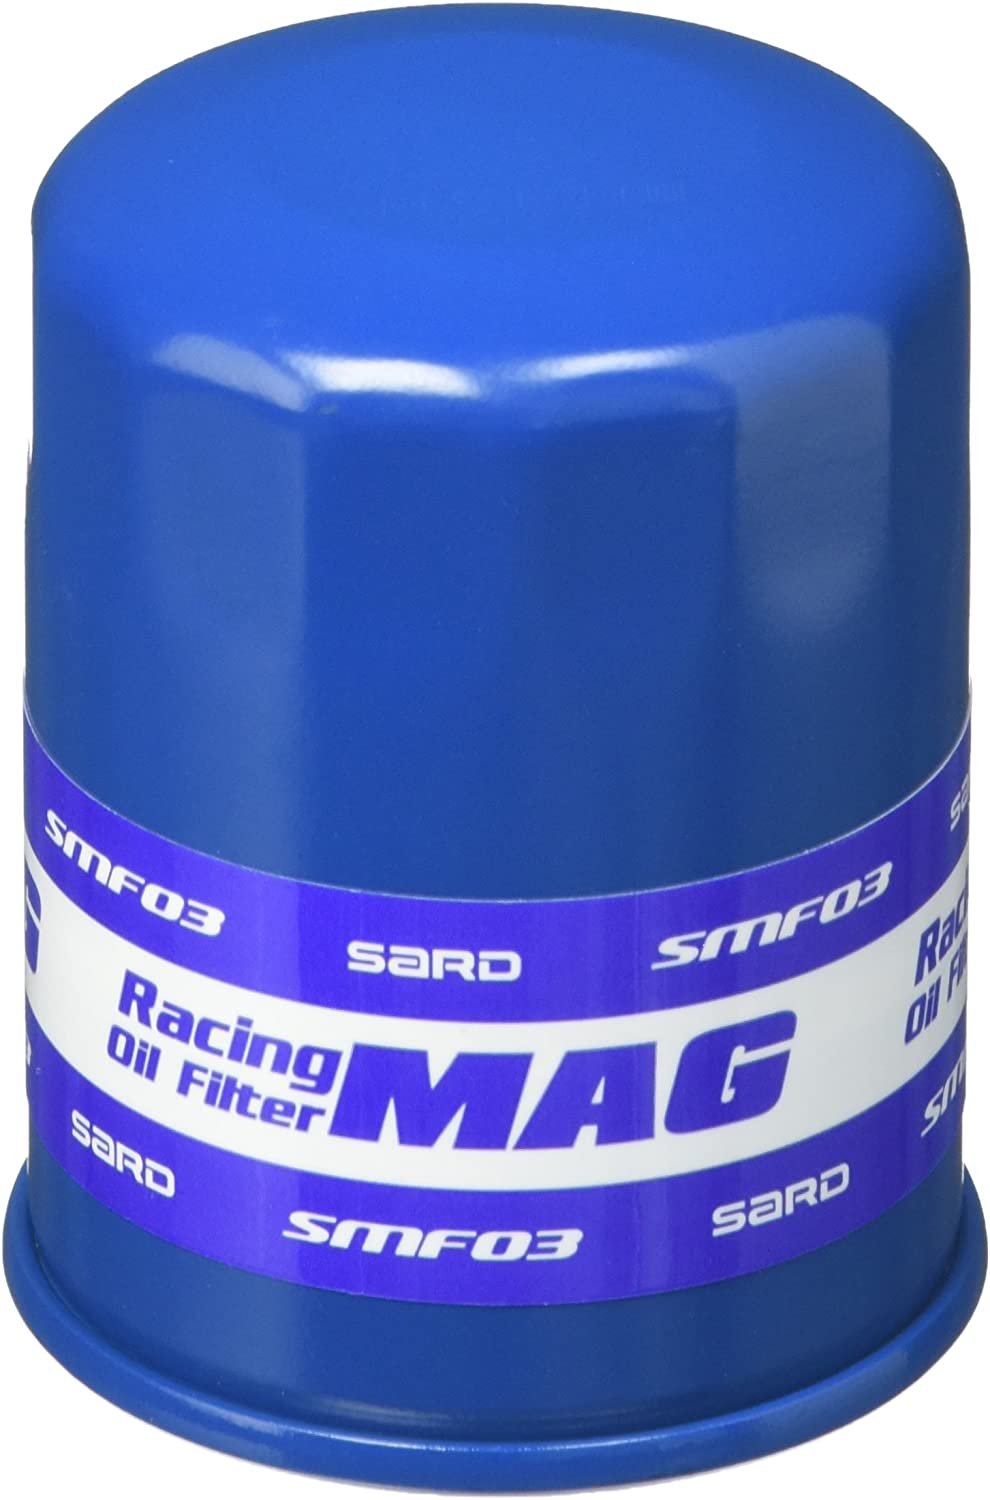 SARD RACING OIL FILTER For MIRA GINO L700S L710S SMF00